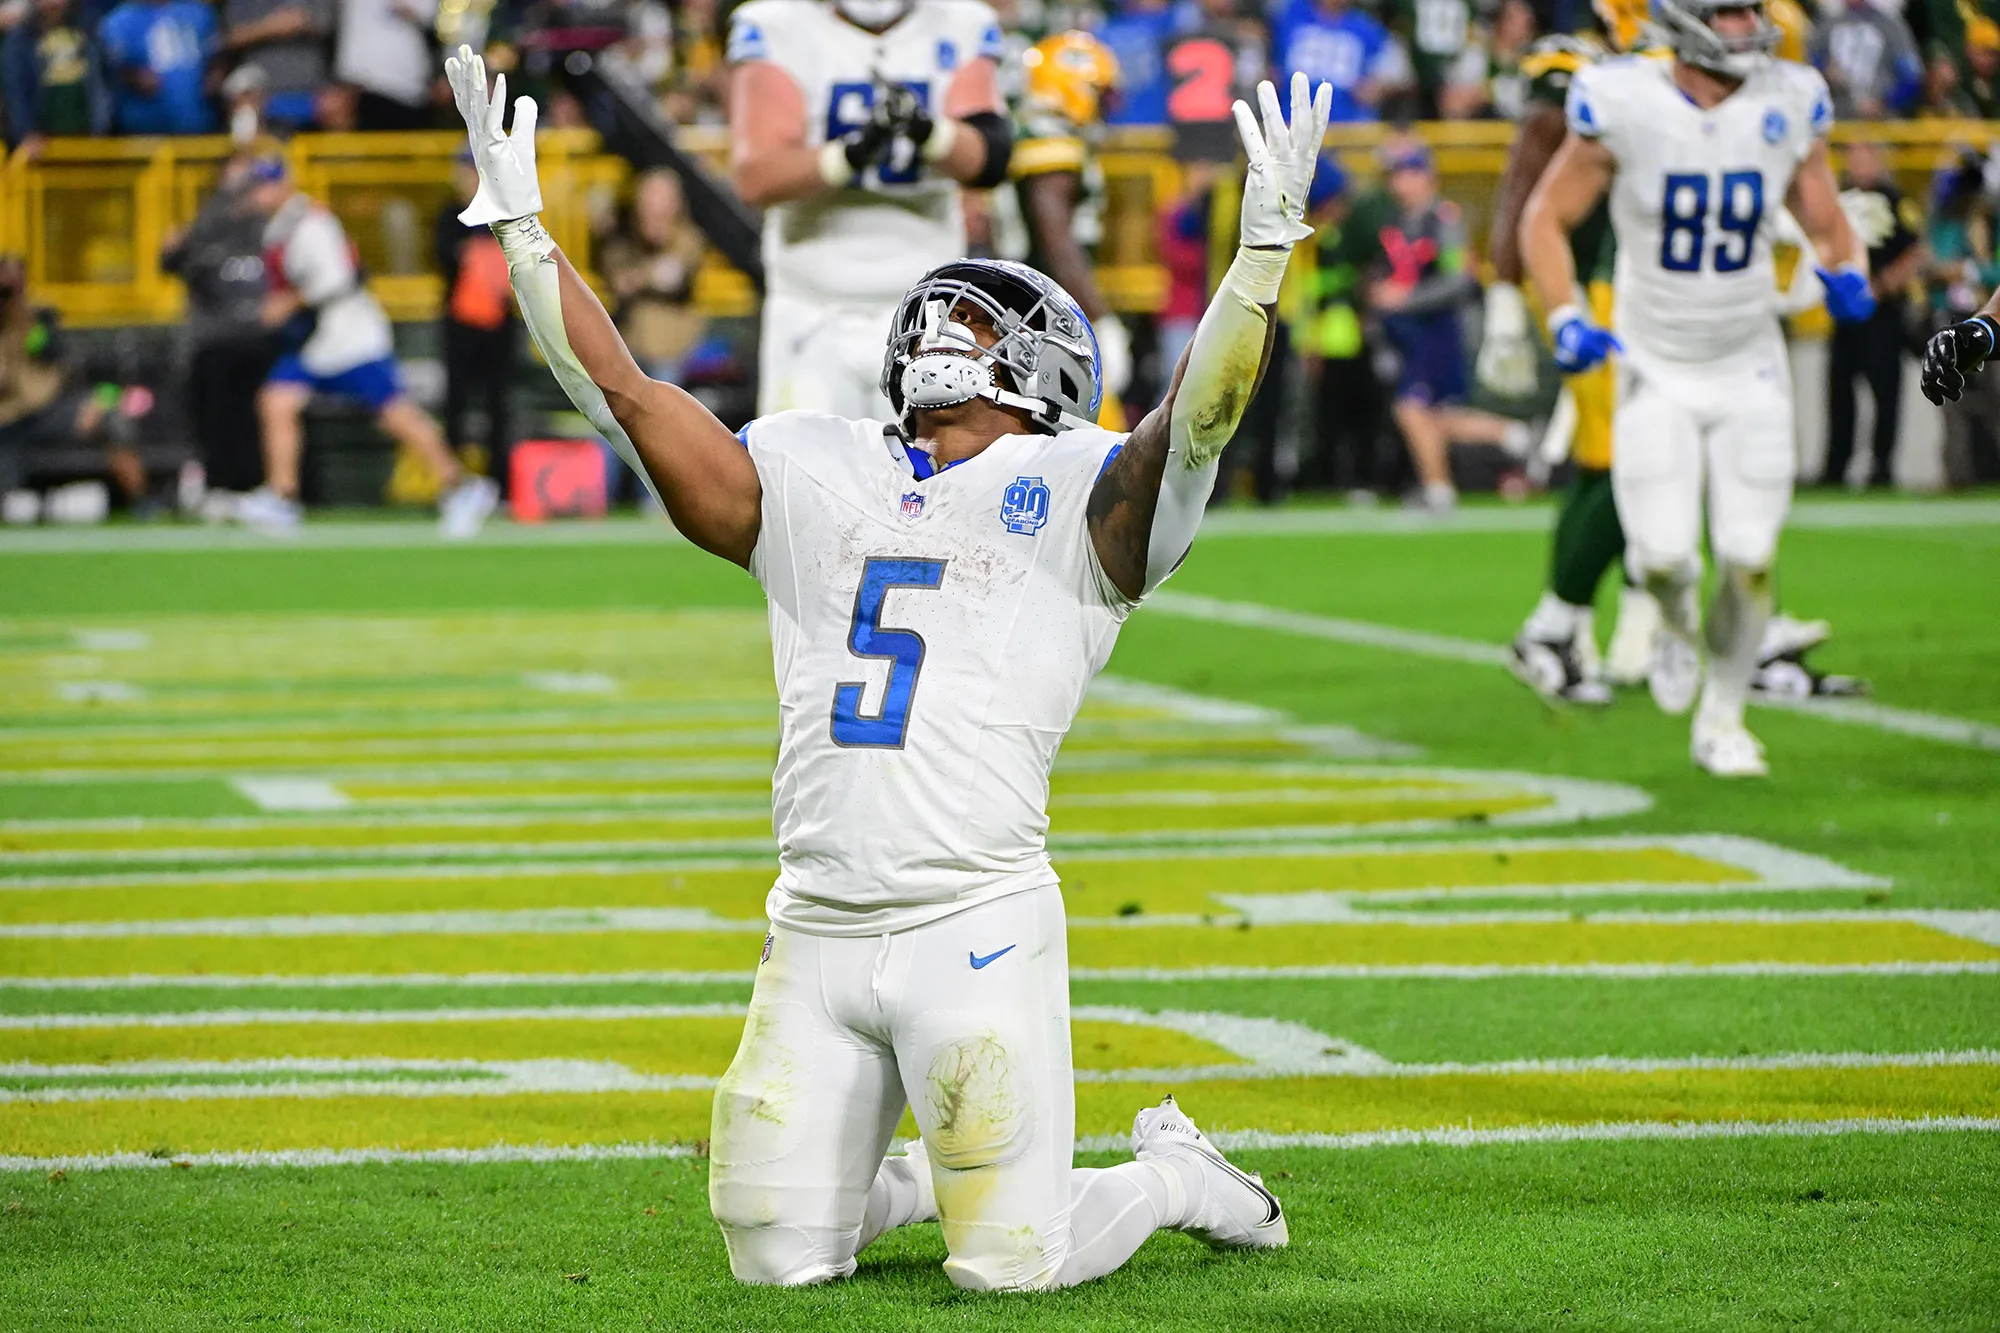 Lions Running Back David Montgomery Scores Three Touchdowns in His First Win Against Green Bay: 'Now I Can Tell My Son that I Beat the Packers!'